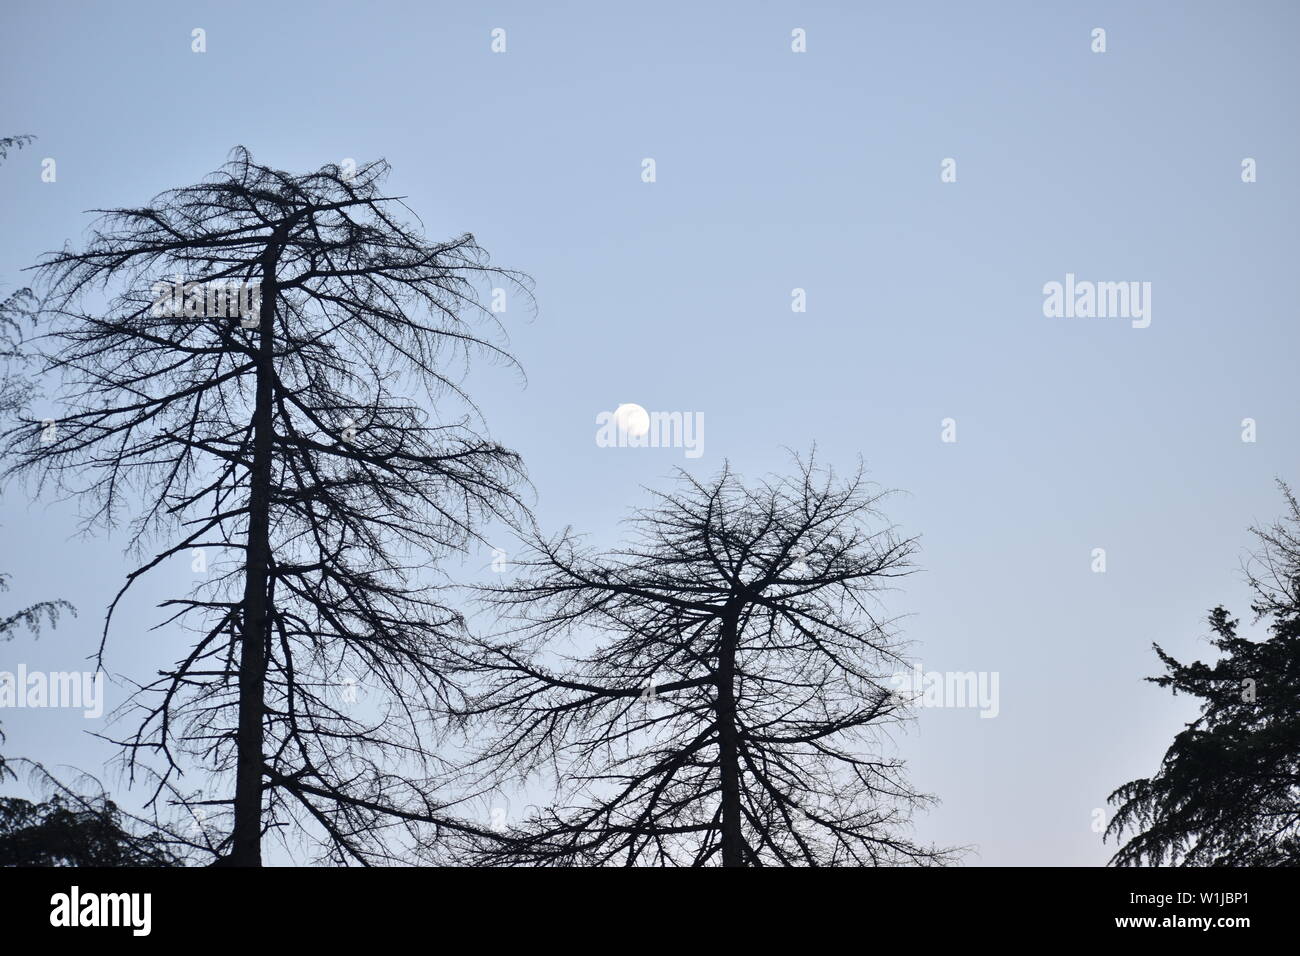 silhouette image of moon and pine trees at kasol, himachal pradesh Stock Photo